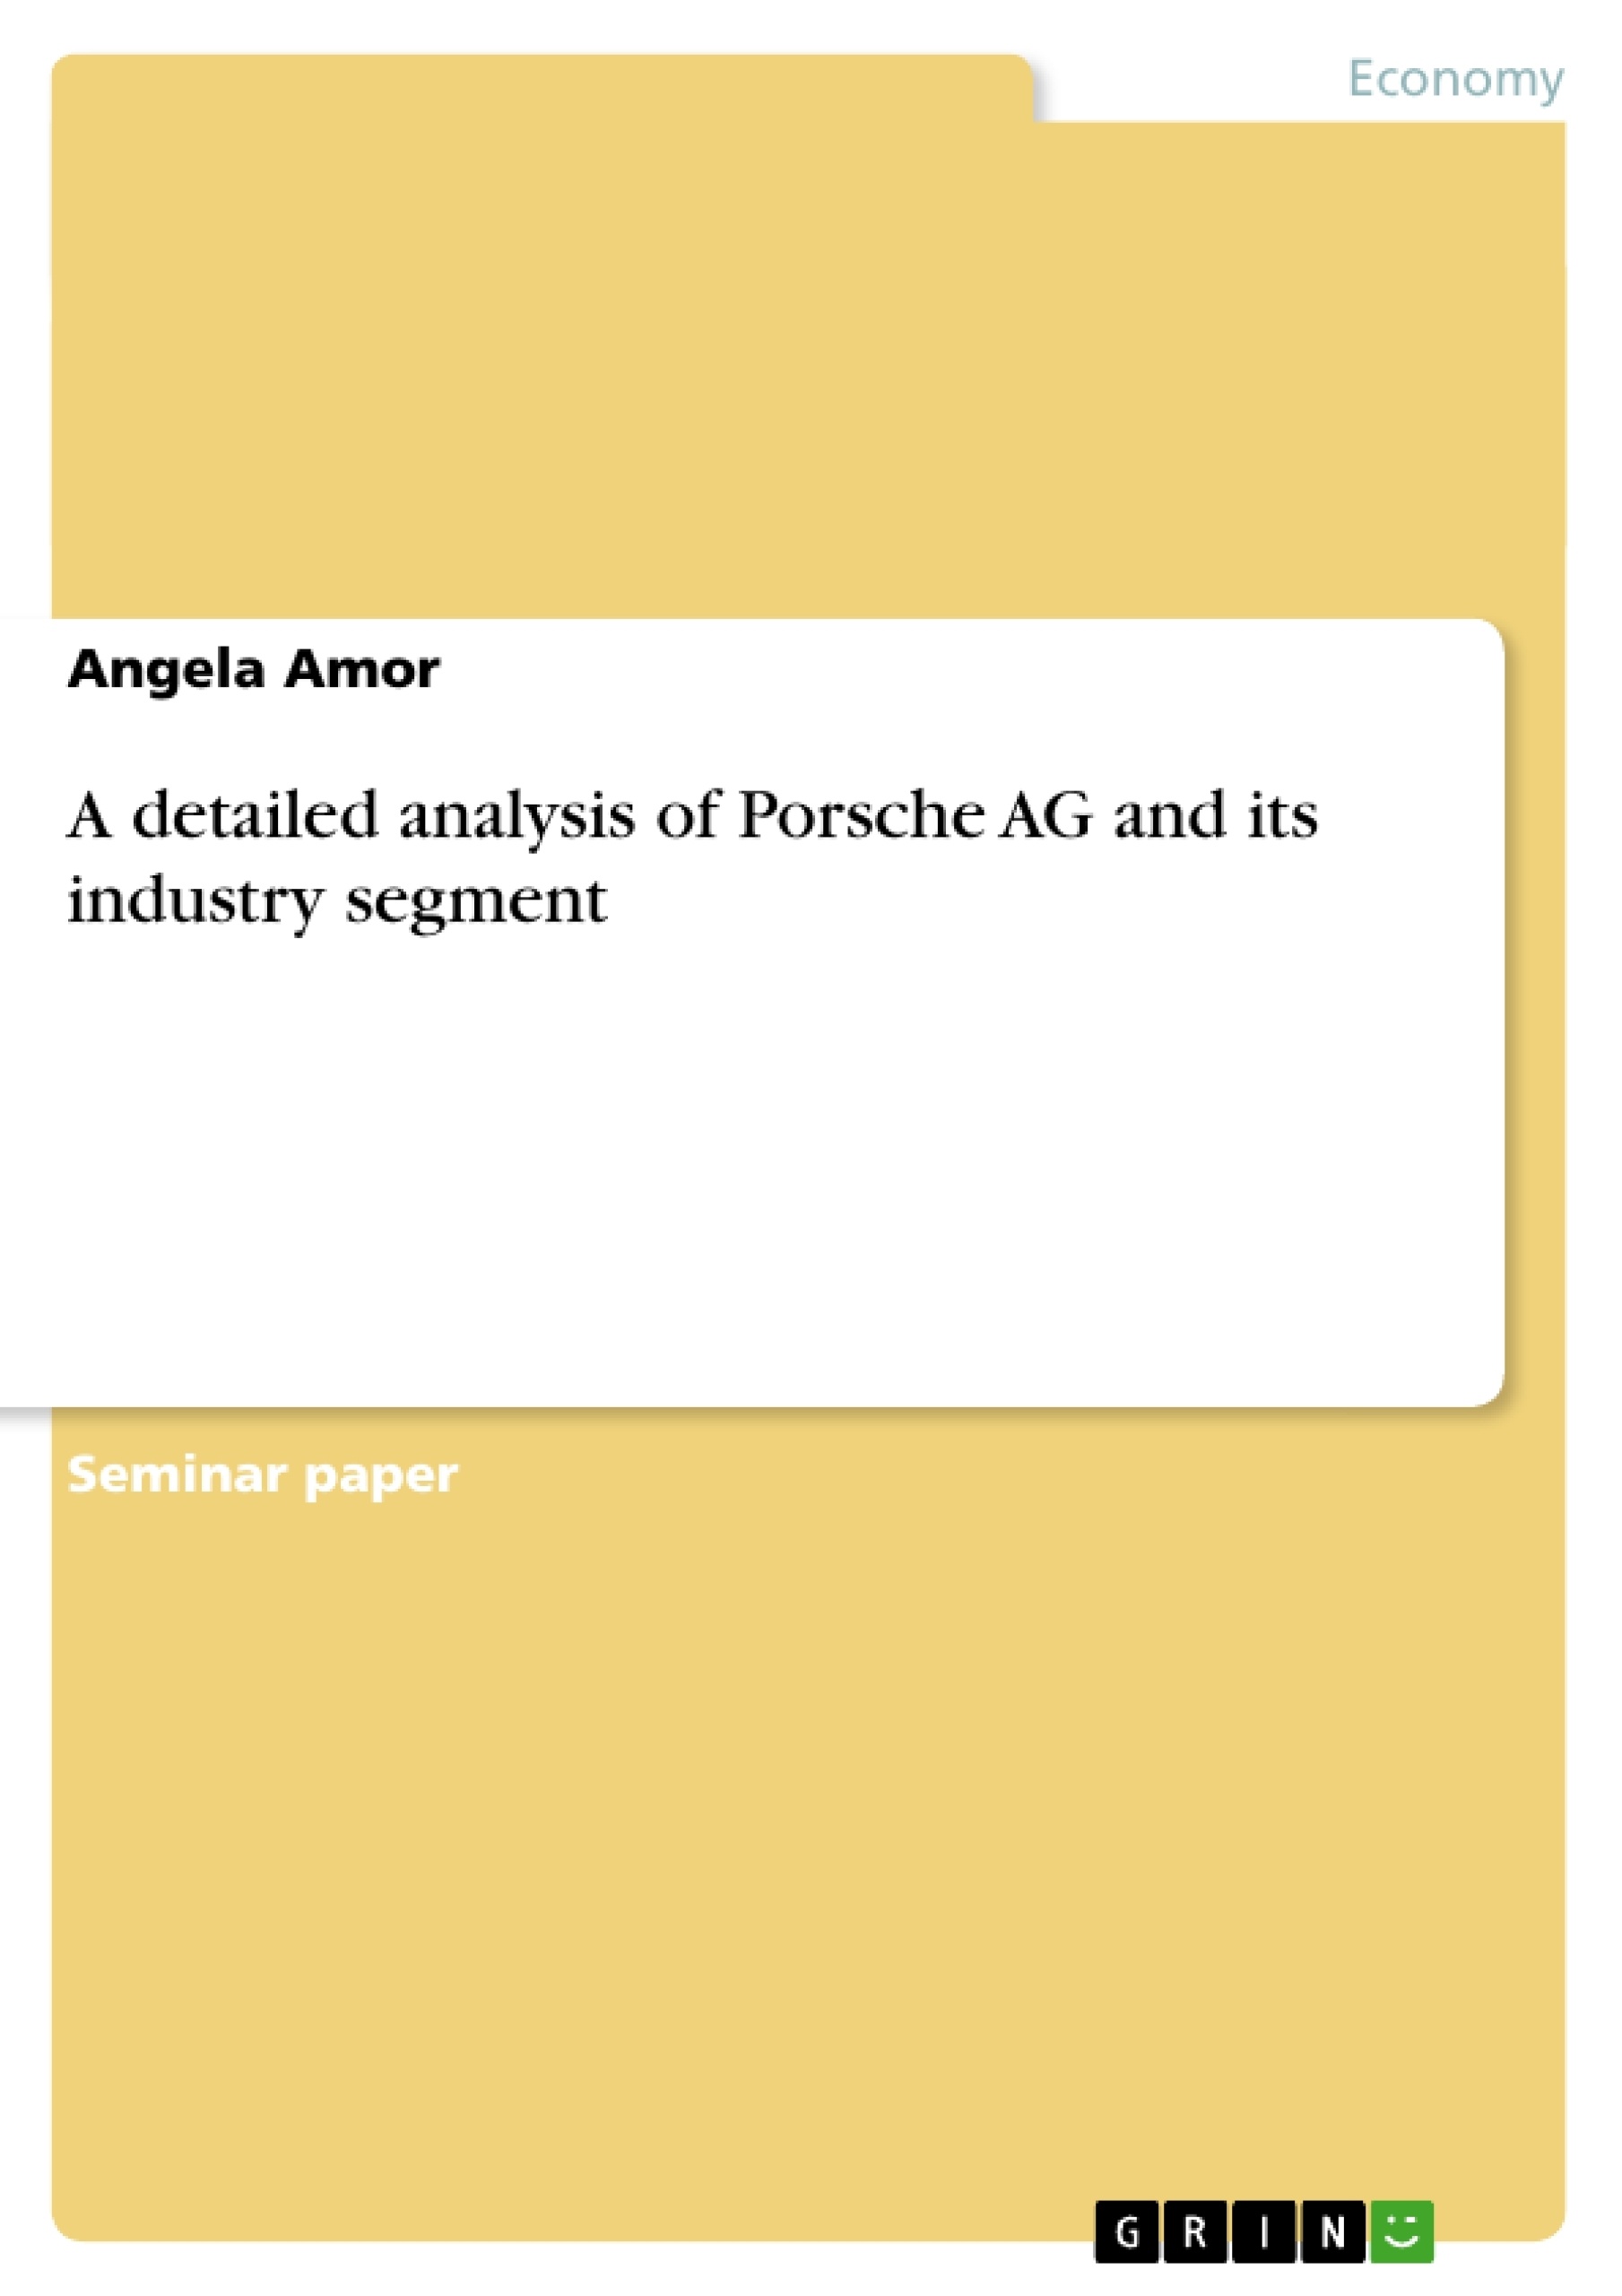 Title: A detailed analysis of Porsche AG and its industry segment